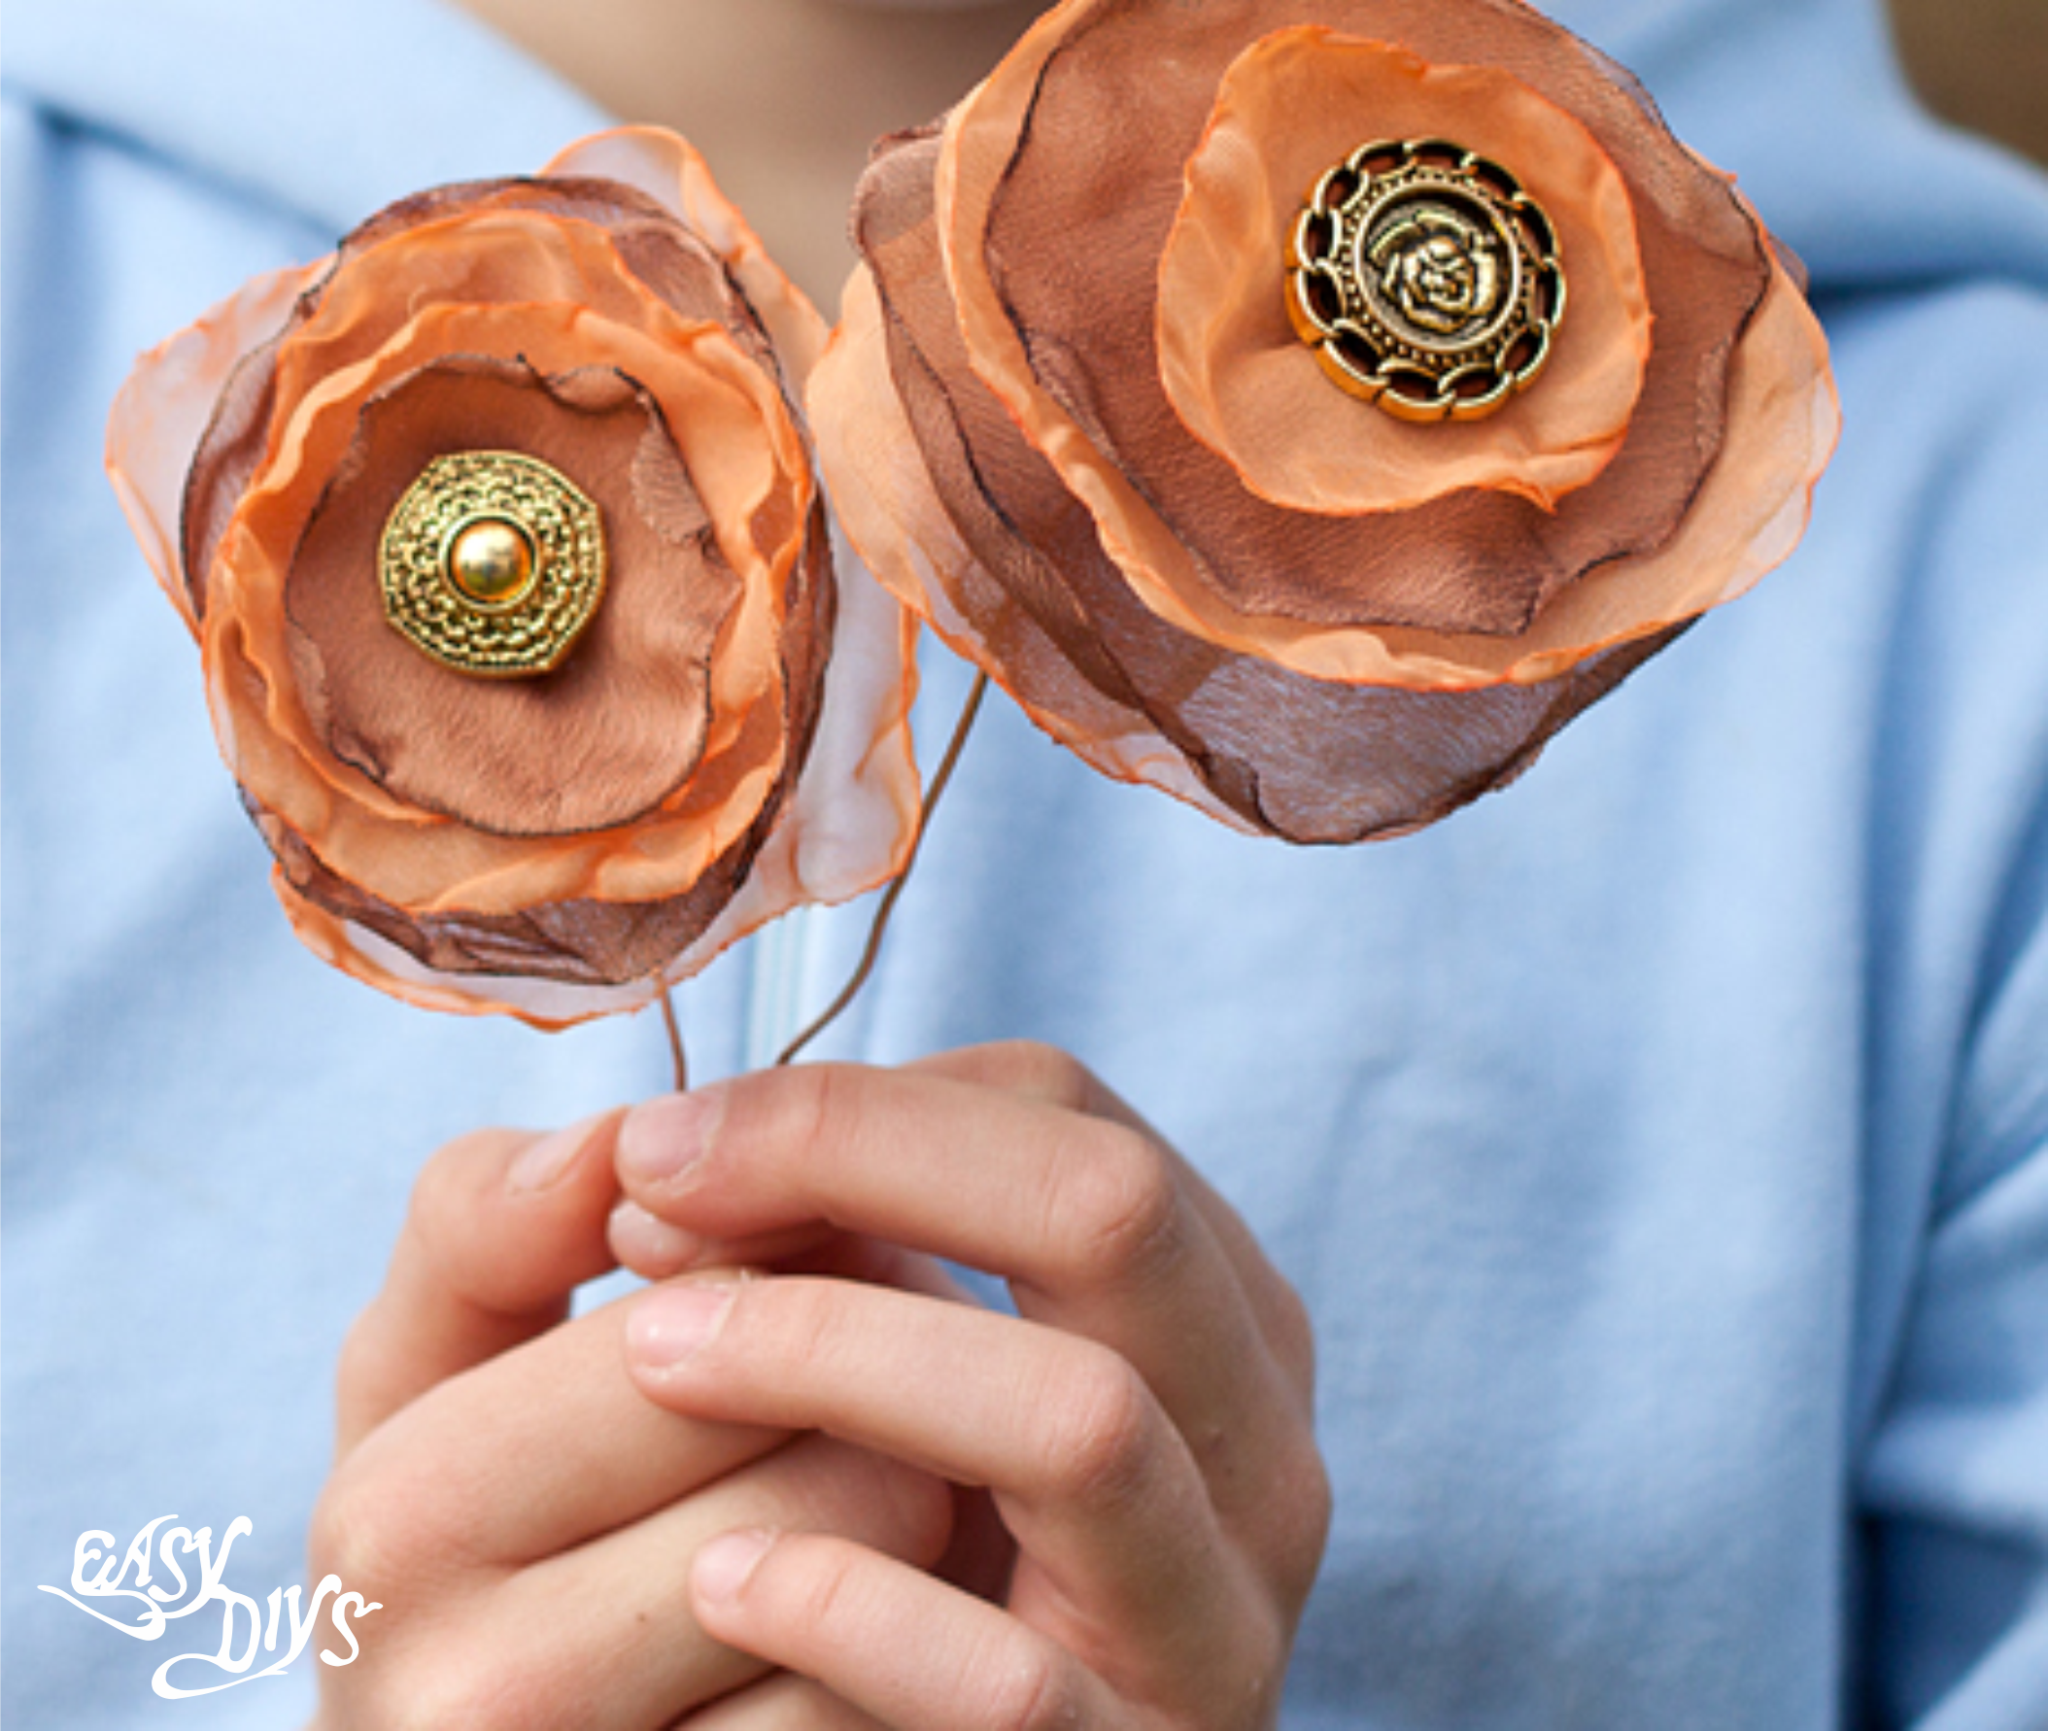 DIY flowers from fabric